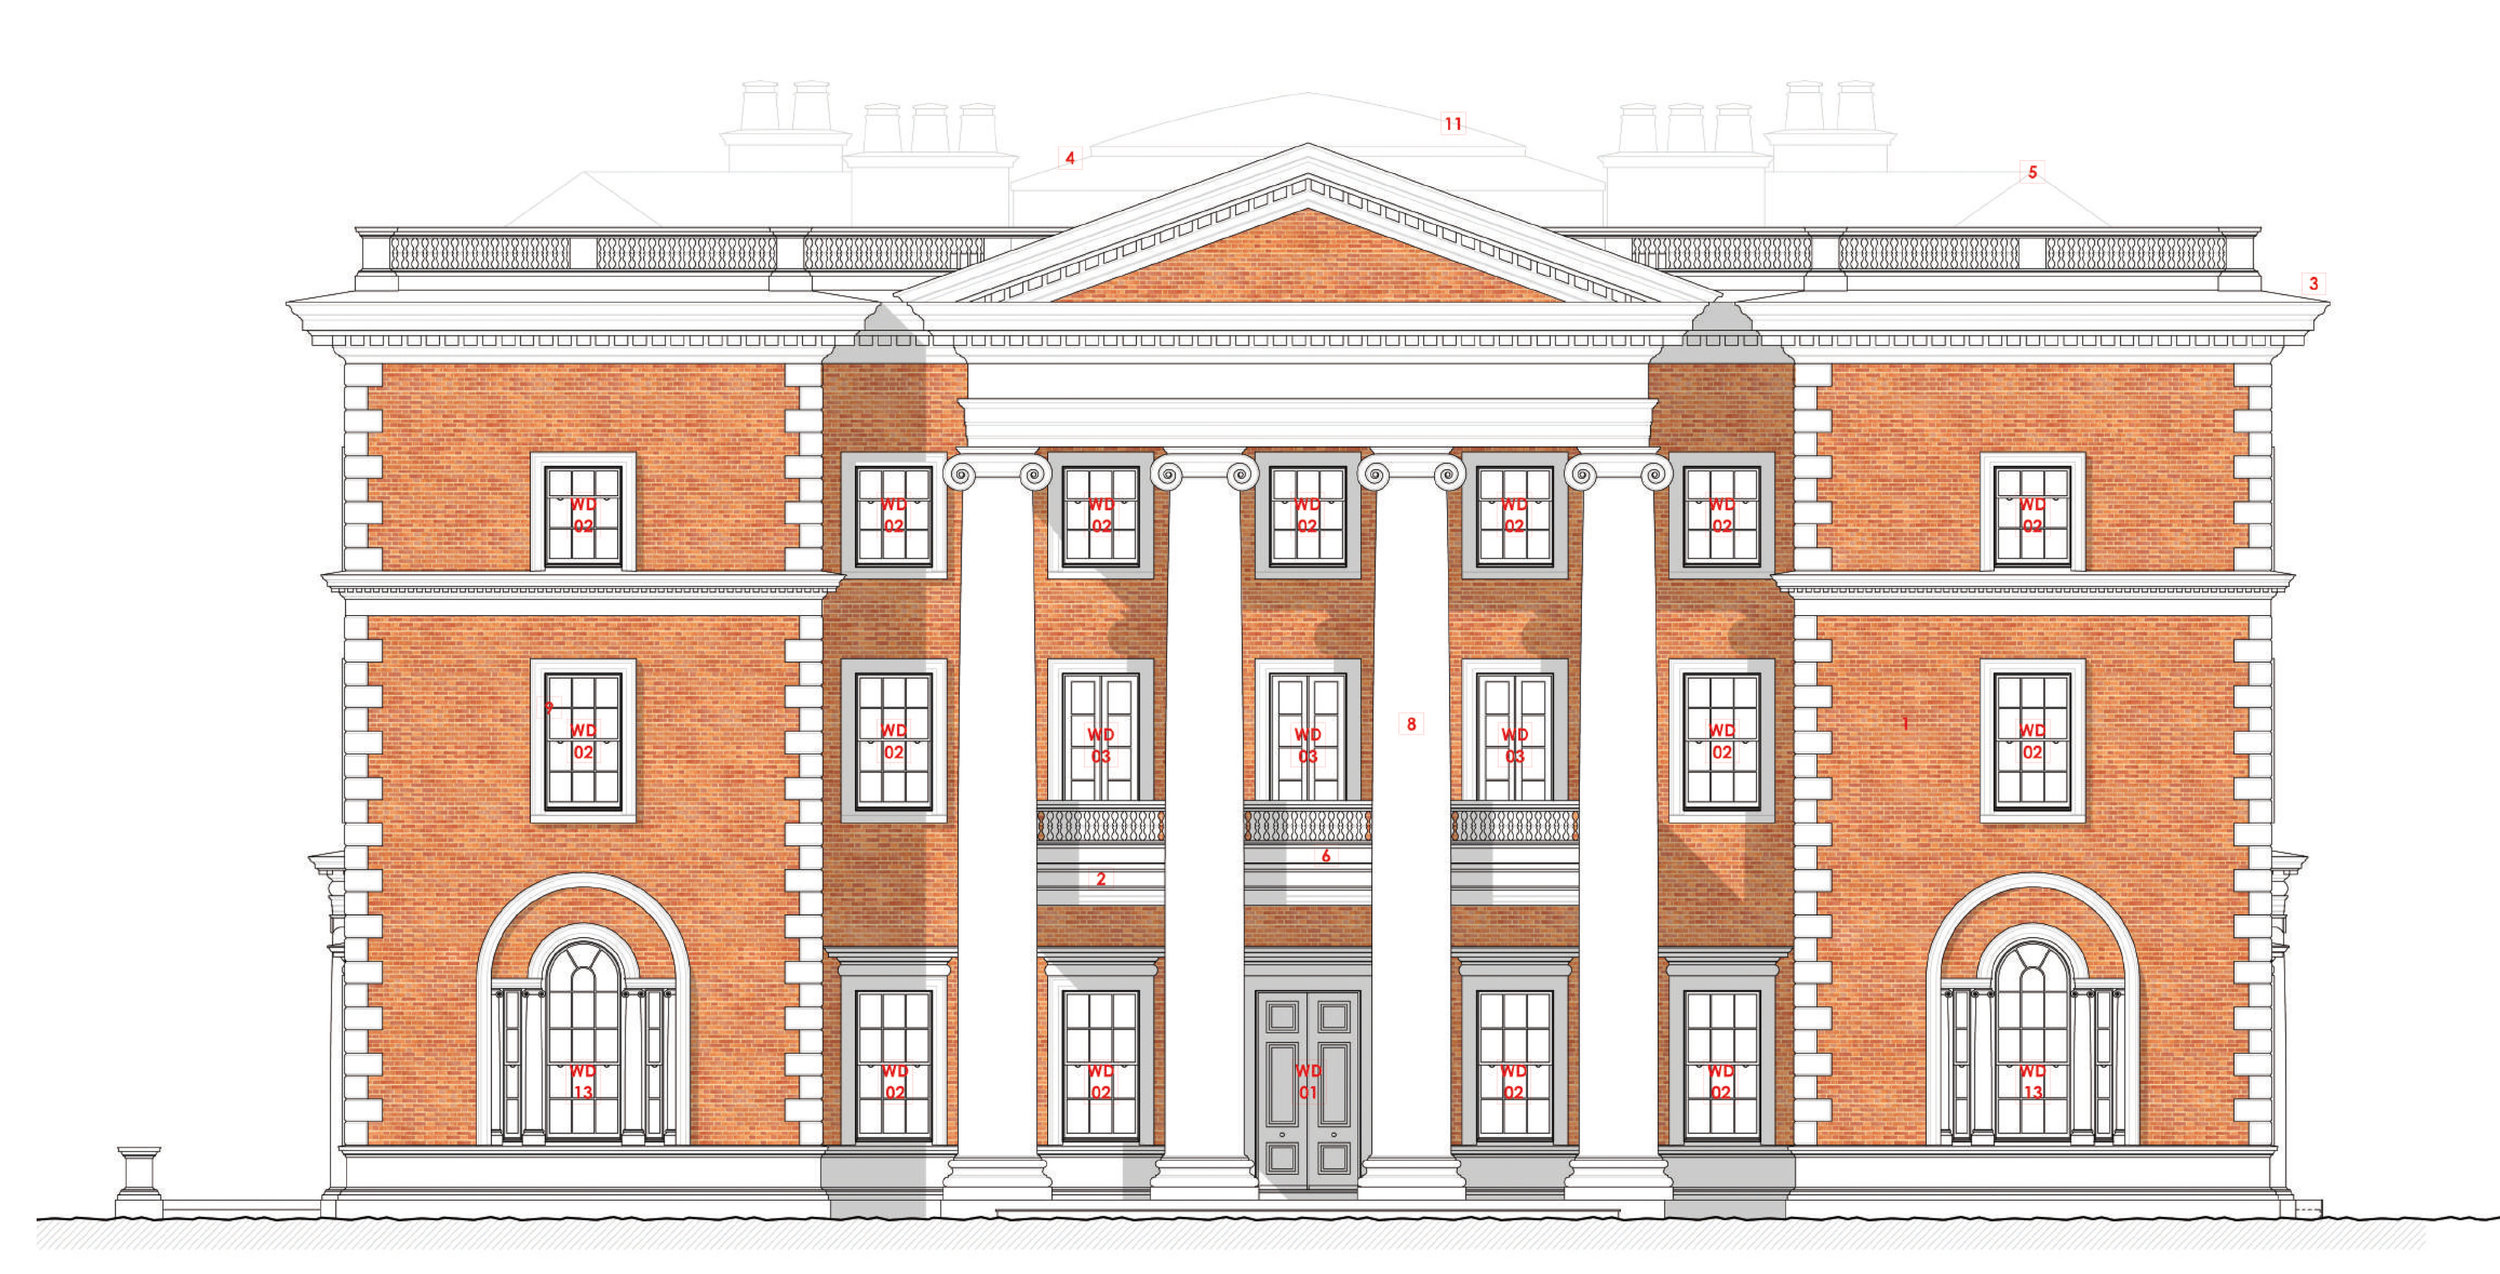 Proposed South Elevation.jpg